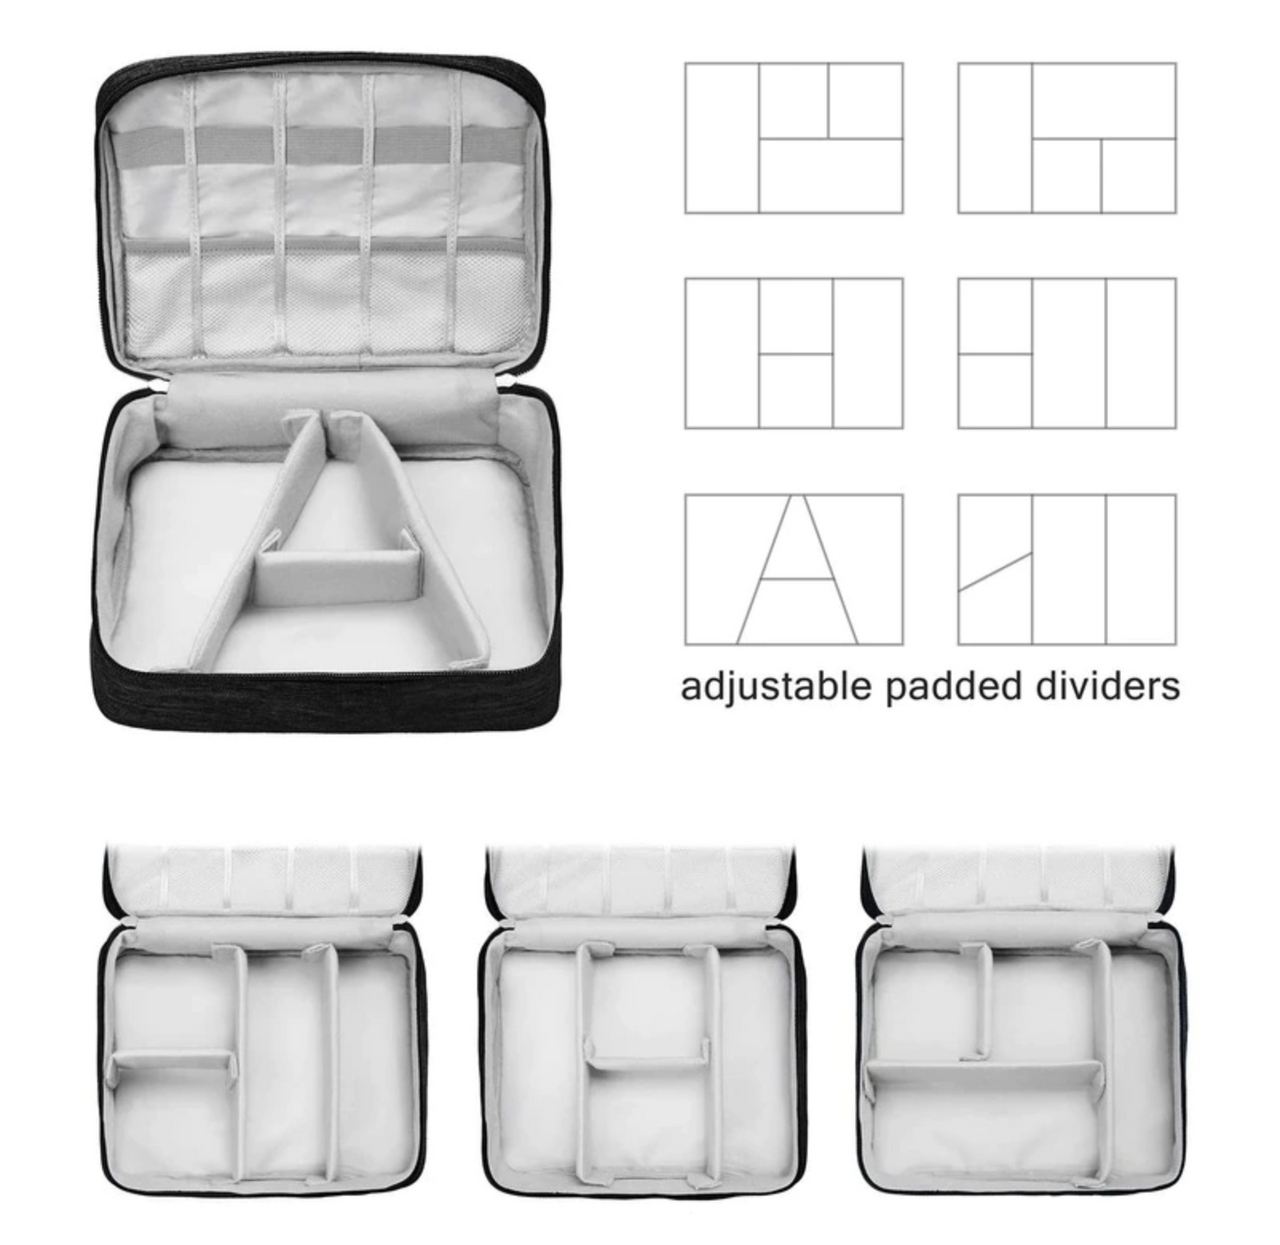 Electronic & Accessories & Cables Organizer & Storage Bags